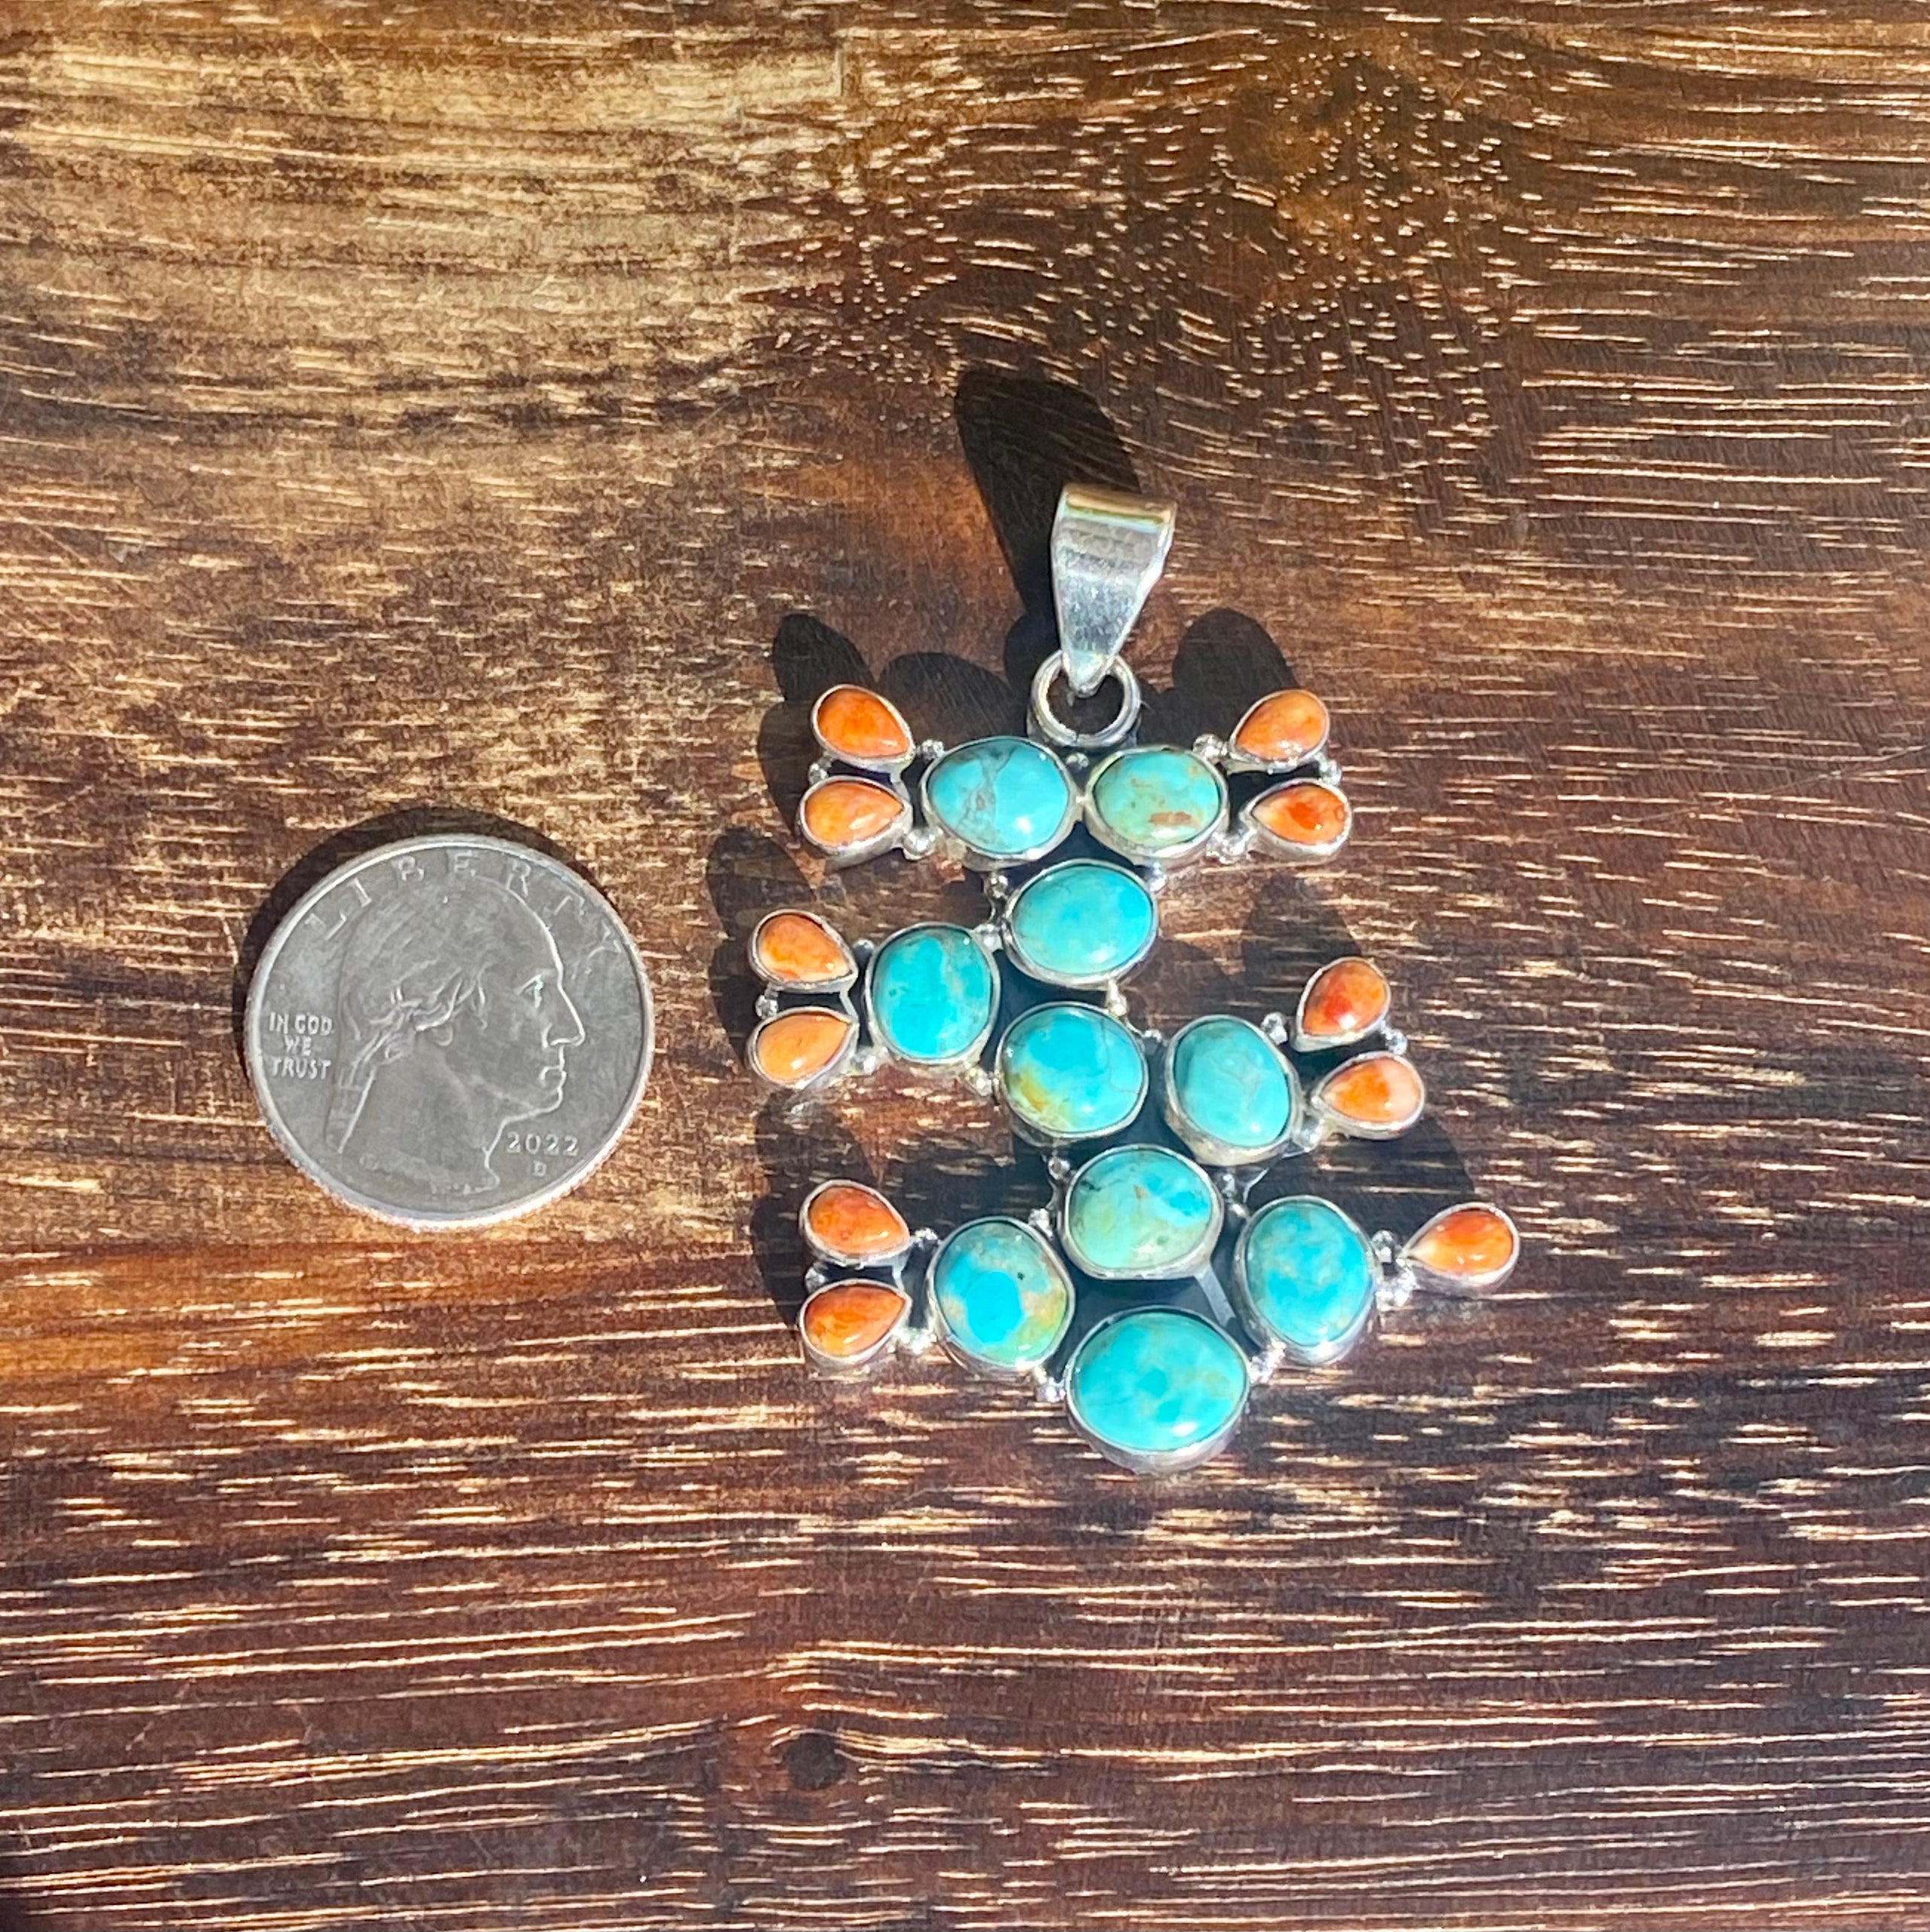 Southwest Handmade Kingman Turquoise & Spiny Oys Sterling Silver Prickly Pear Cactus Pendants